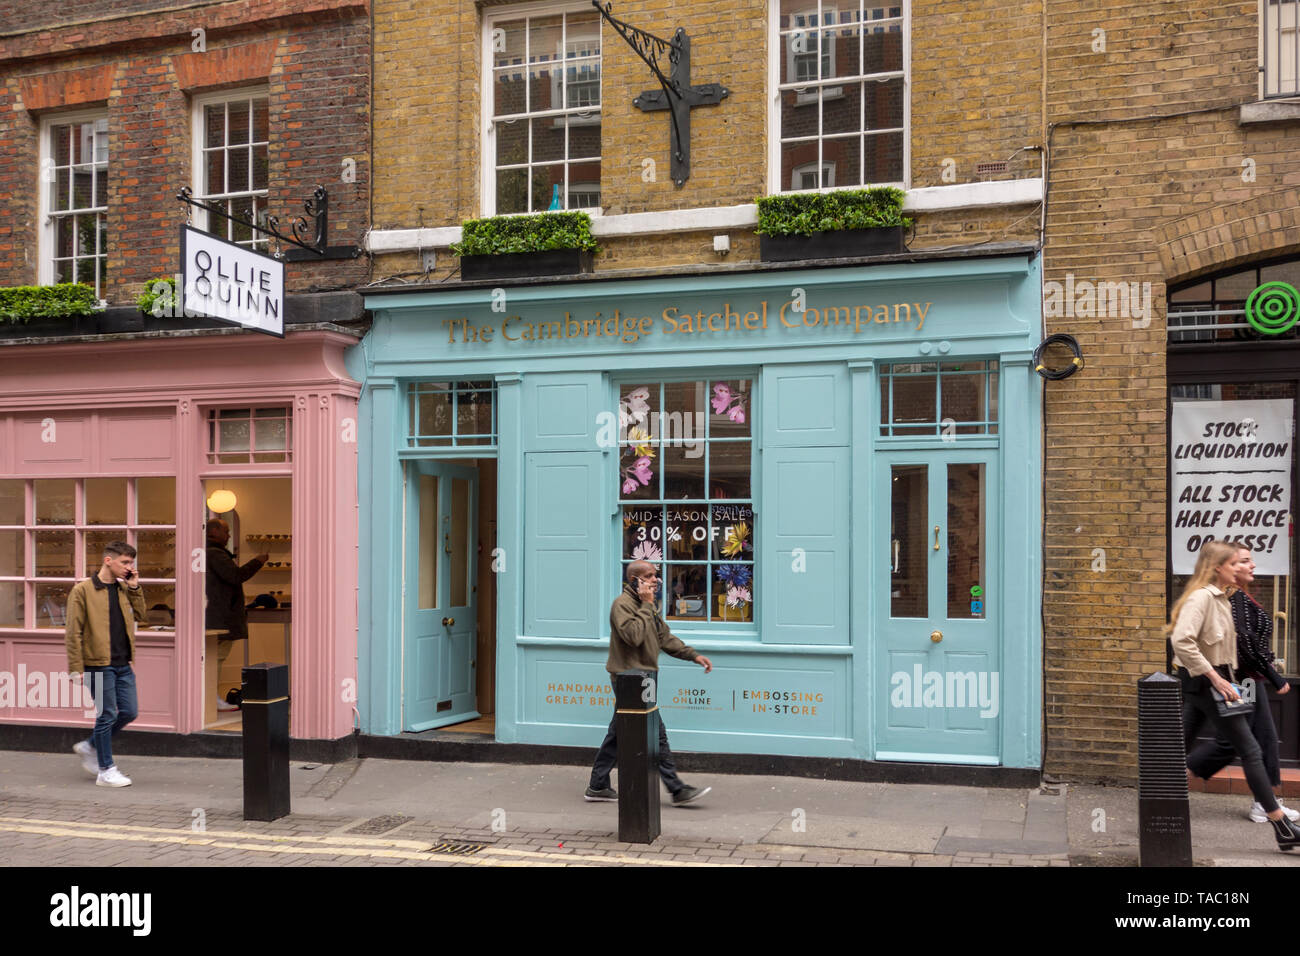 3rd May 2019, Covent Garden, London: Store exterior of The Cambridge Satchel Company shop in Neal Street, Covent Garden, London, UK Stock Photo